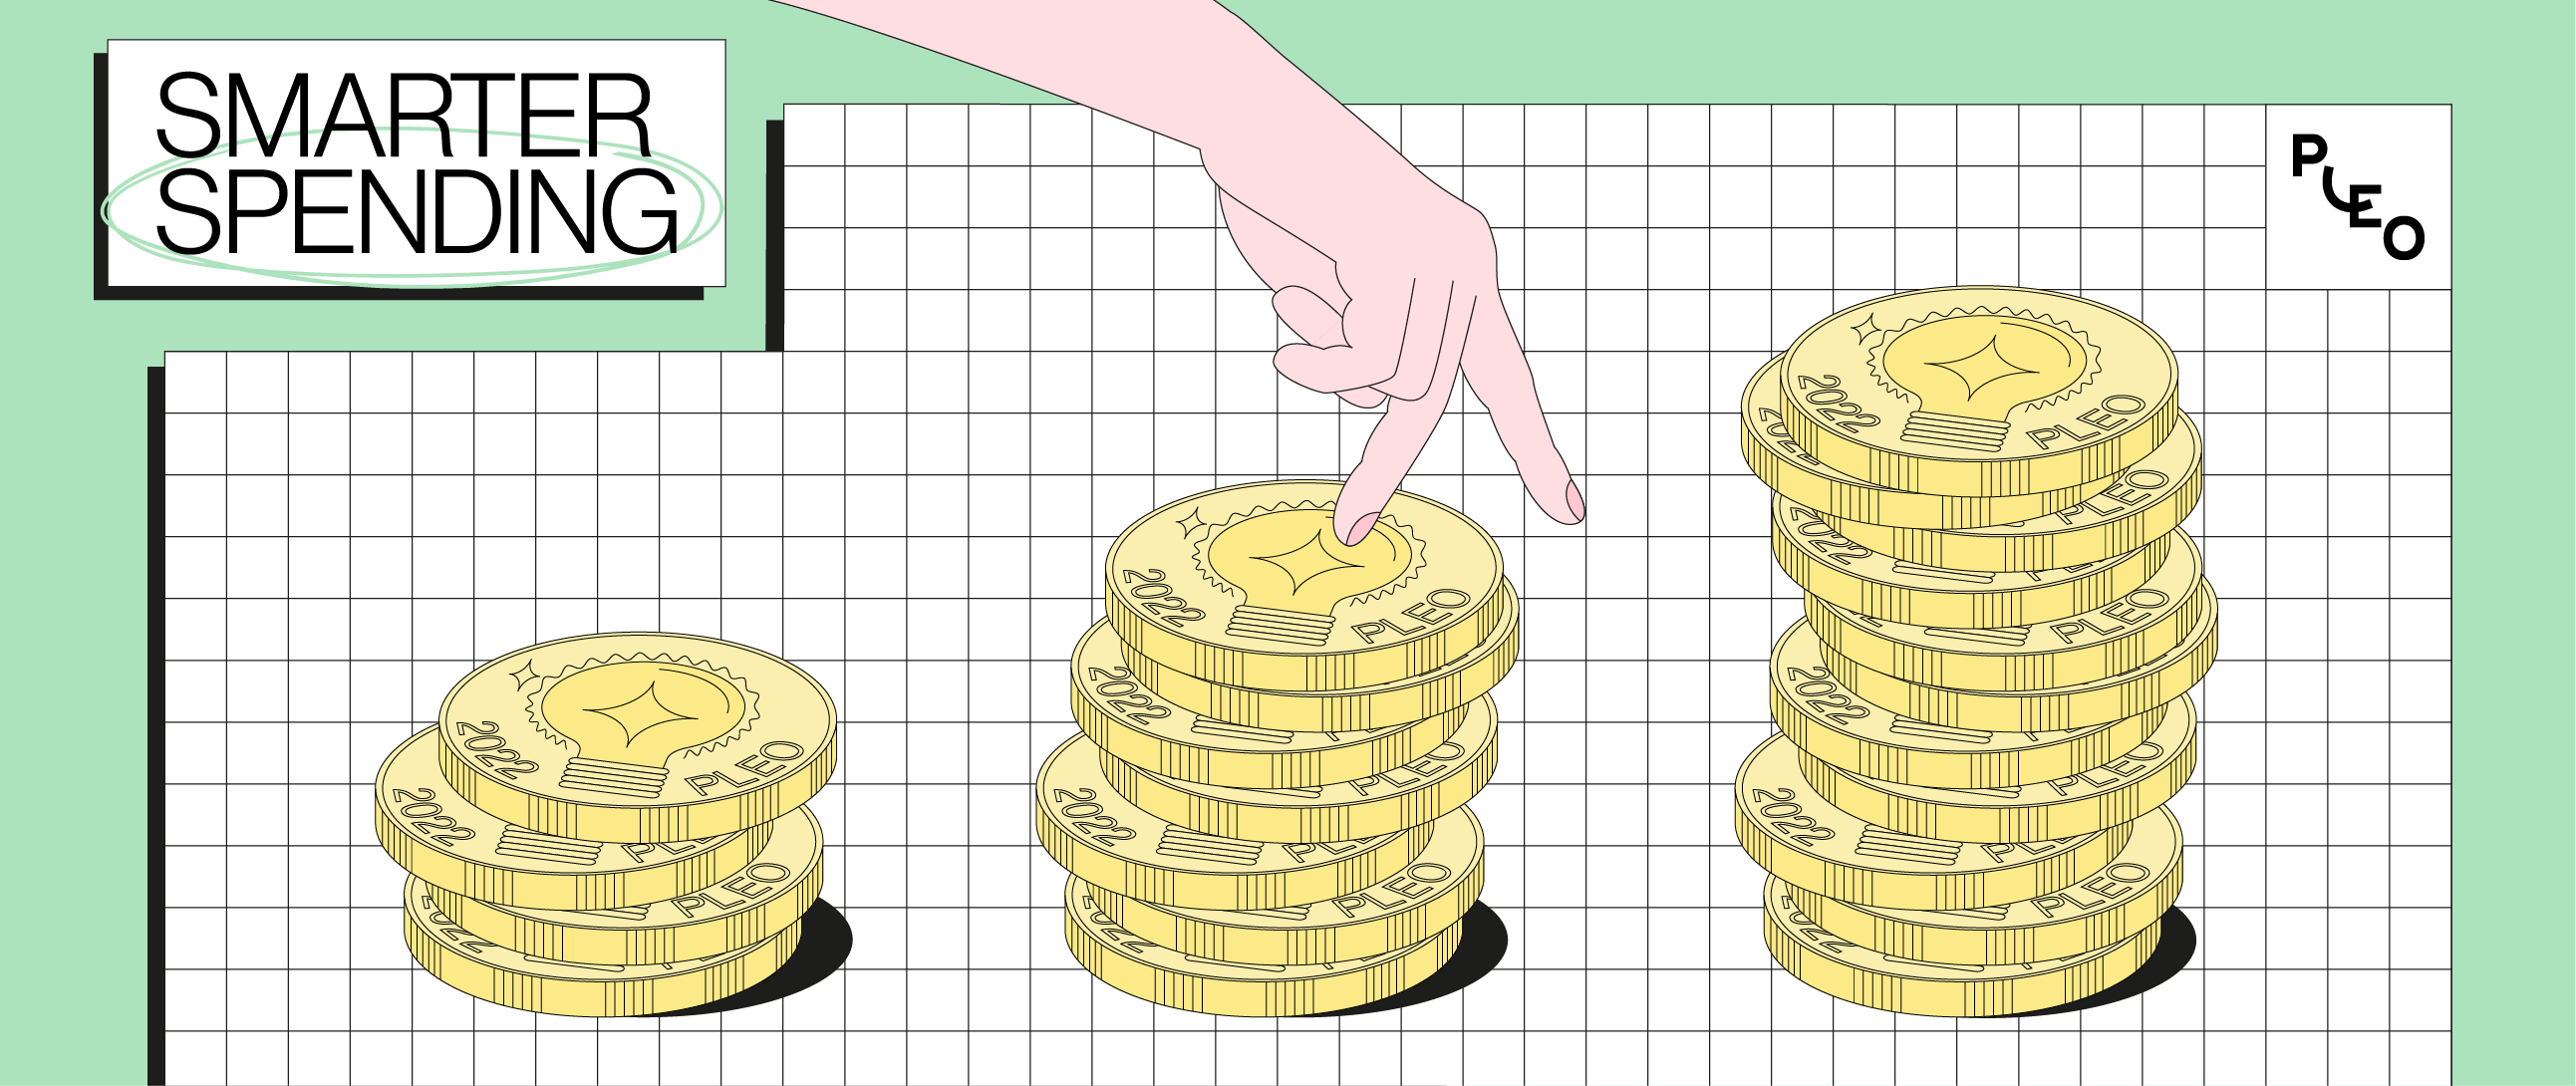 Three stacks of coins